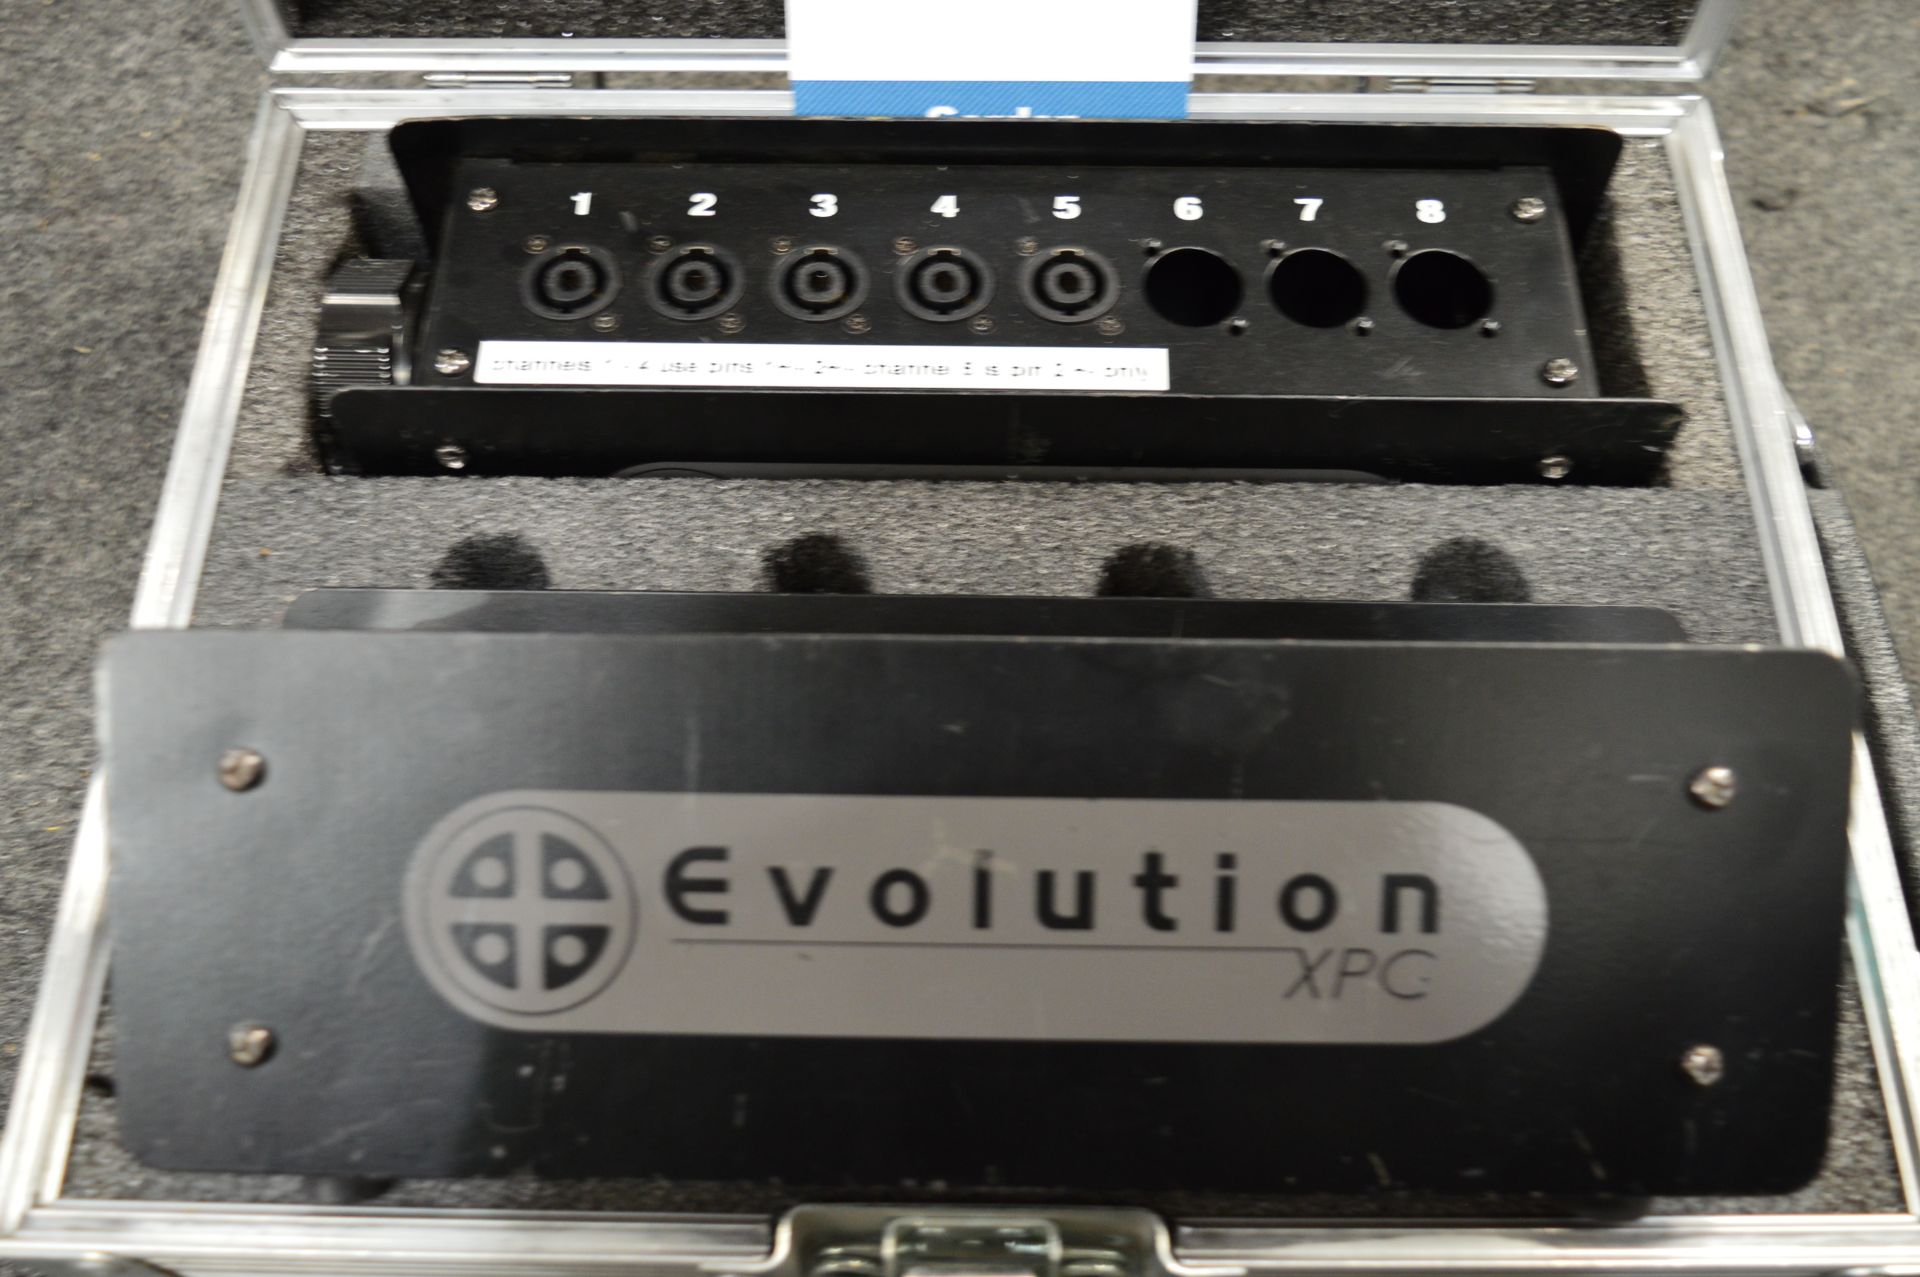 2x No. Evolution, XPC five channel Speakon stage boxes in flight case: Unit 500, Eckersall Road, - Image 2 of 4